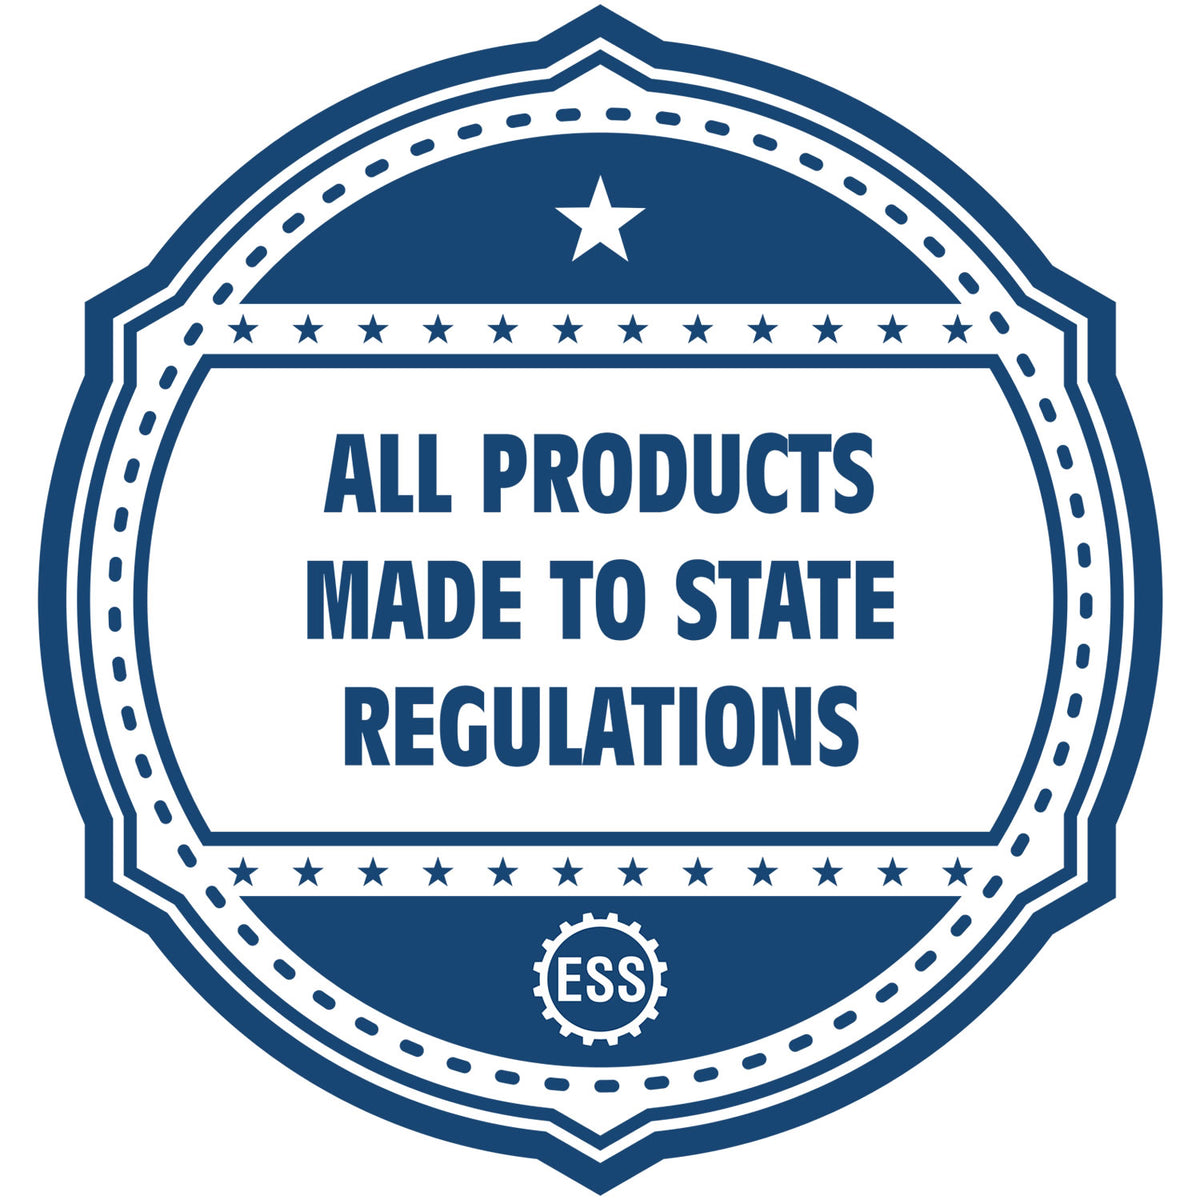 An icon or badge element for the Heavy-Duty West Virginia Rectangular Notary Stamp showing that this product is made in compliance with state regulations.